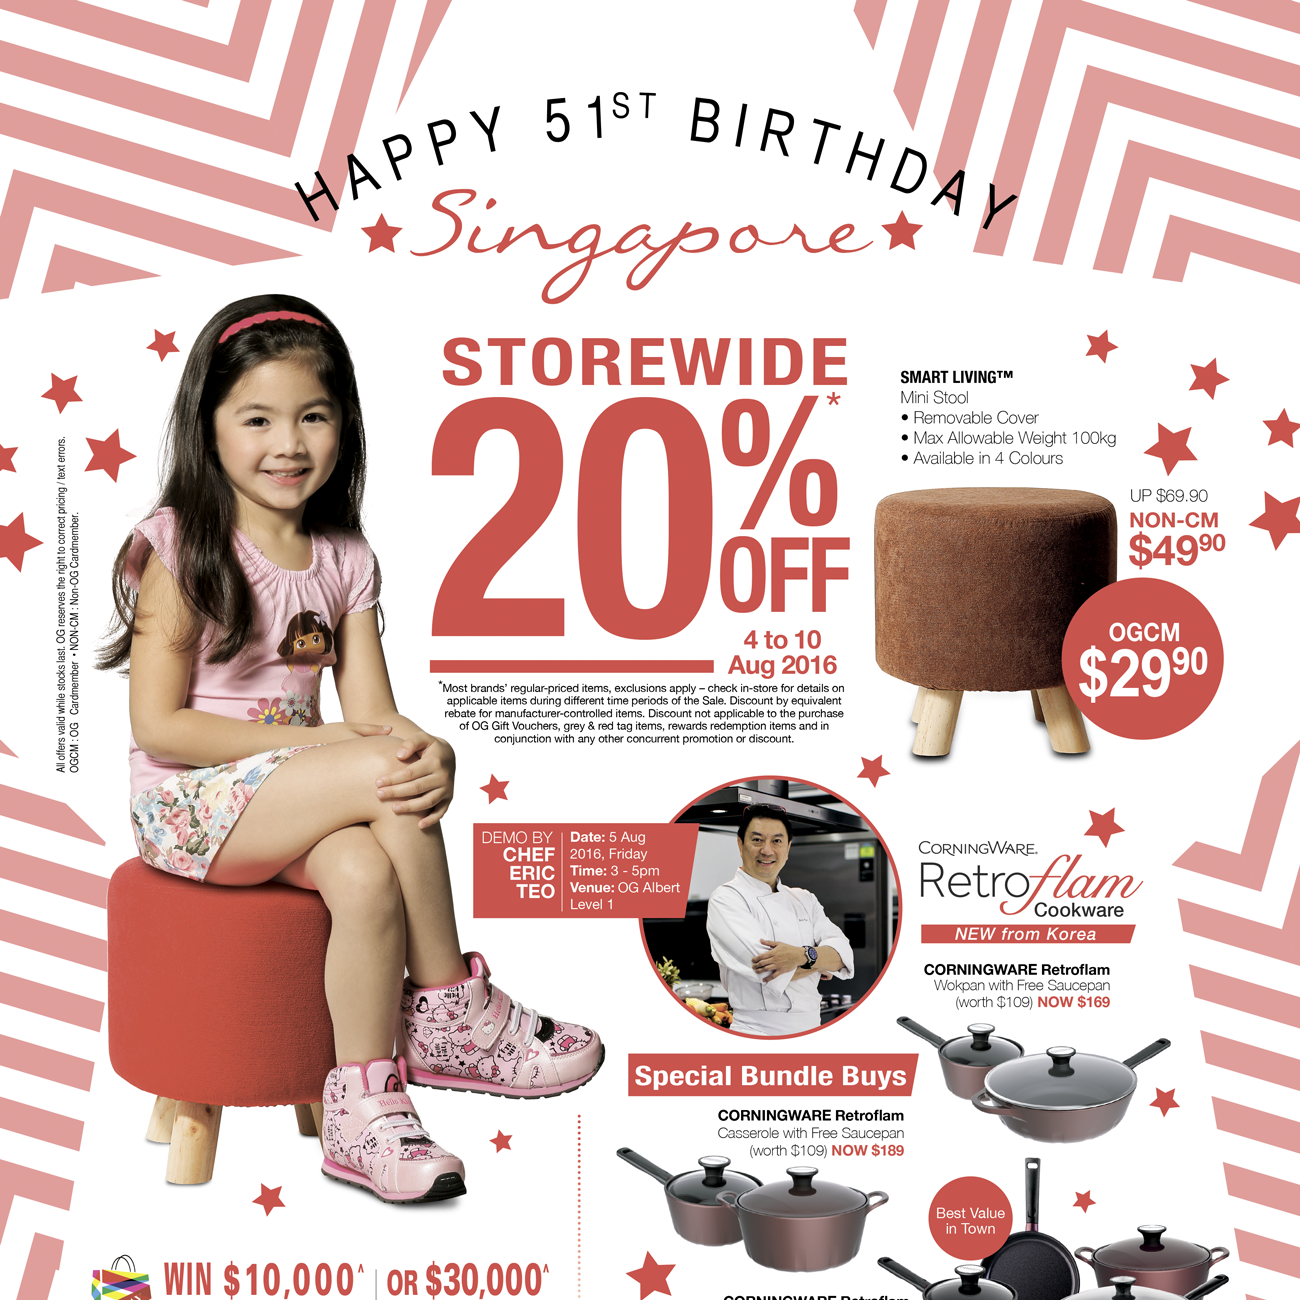 OG SG51 20% Off Storewide Singapore Promotion 4 to 10 Aug 2016